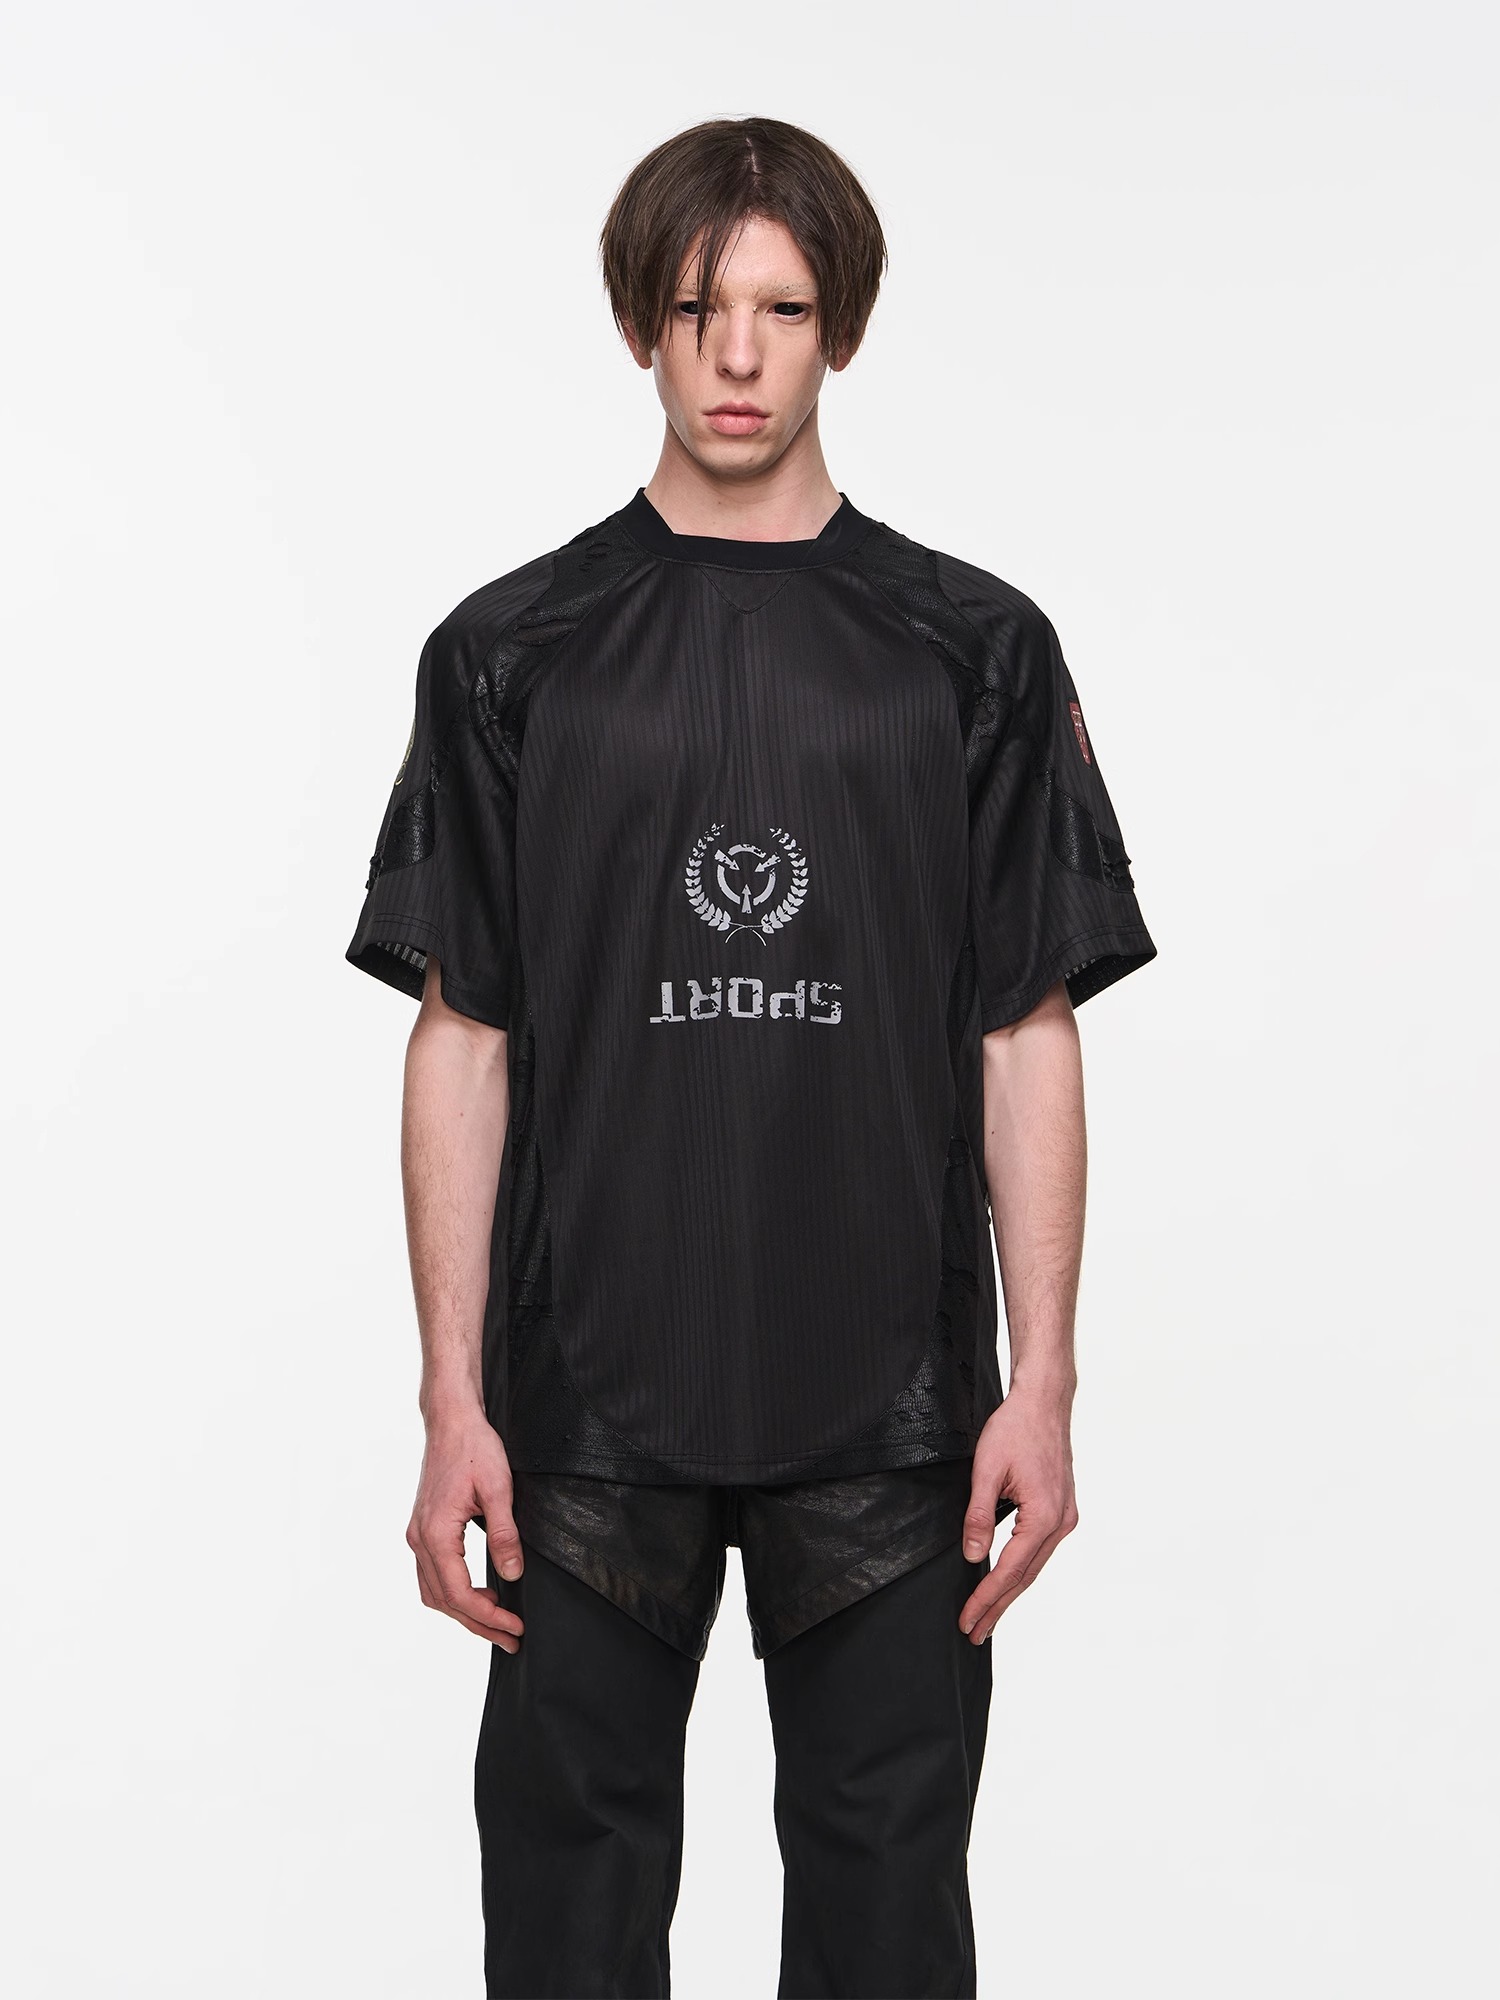 BLINDNOPLAN 24SS Distressed Reconstructed Texture Jersey